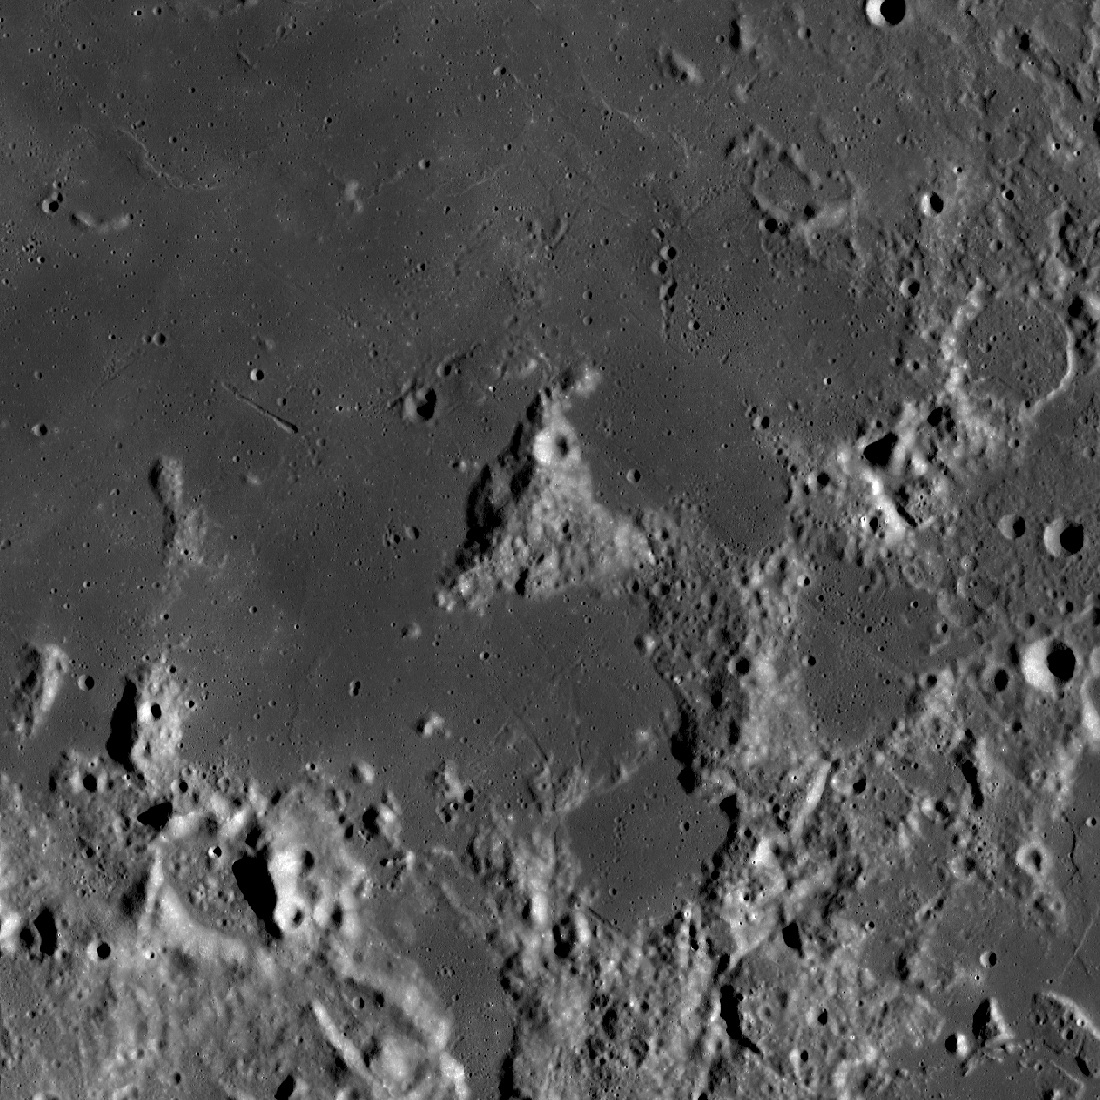 138 km wide view, centered on Mt. Marilyn